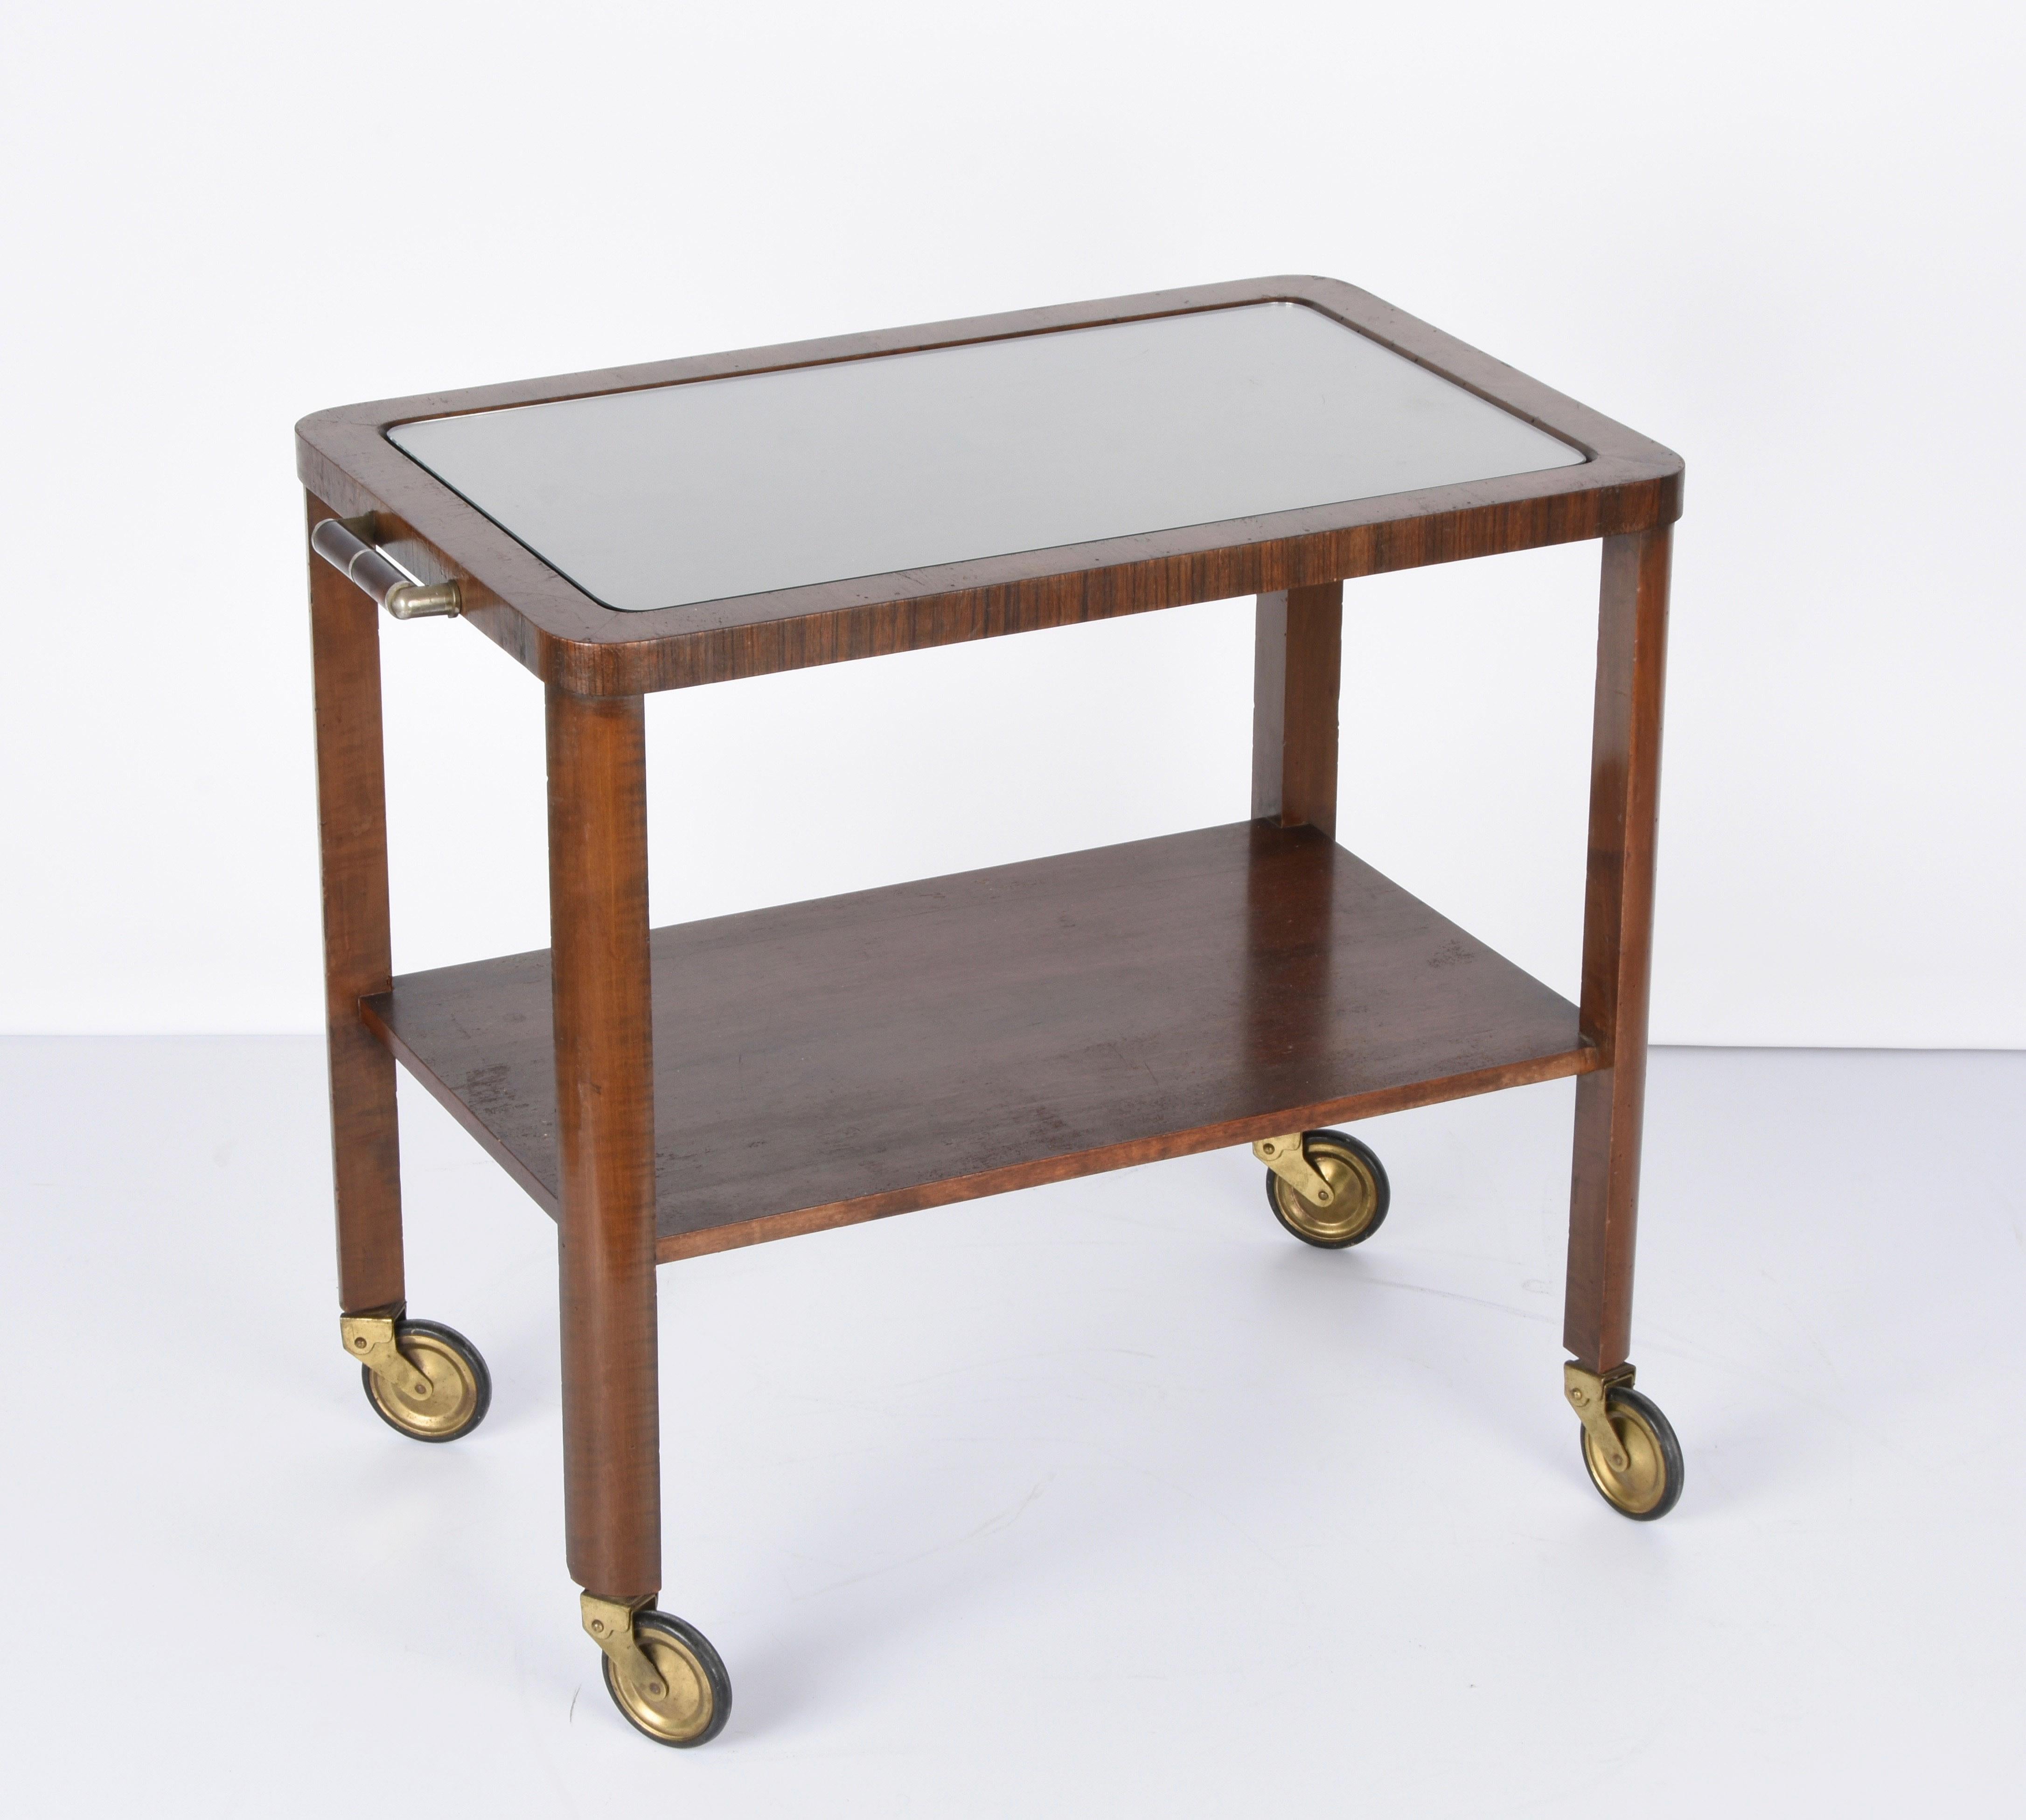 Art Deco Solid Walnut Wood and Glass Two-Levels Italian Trolley Bar Cart, 1940s For Sale 1